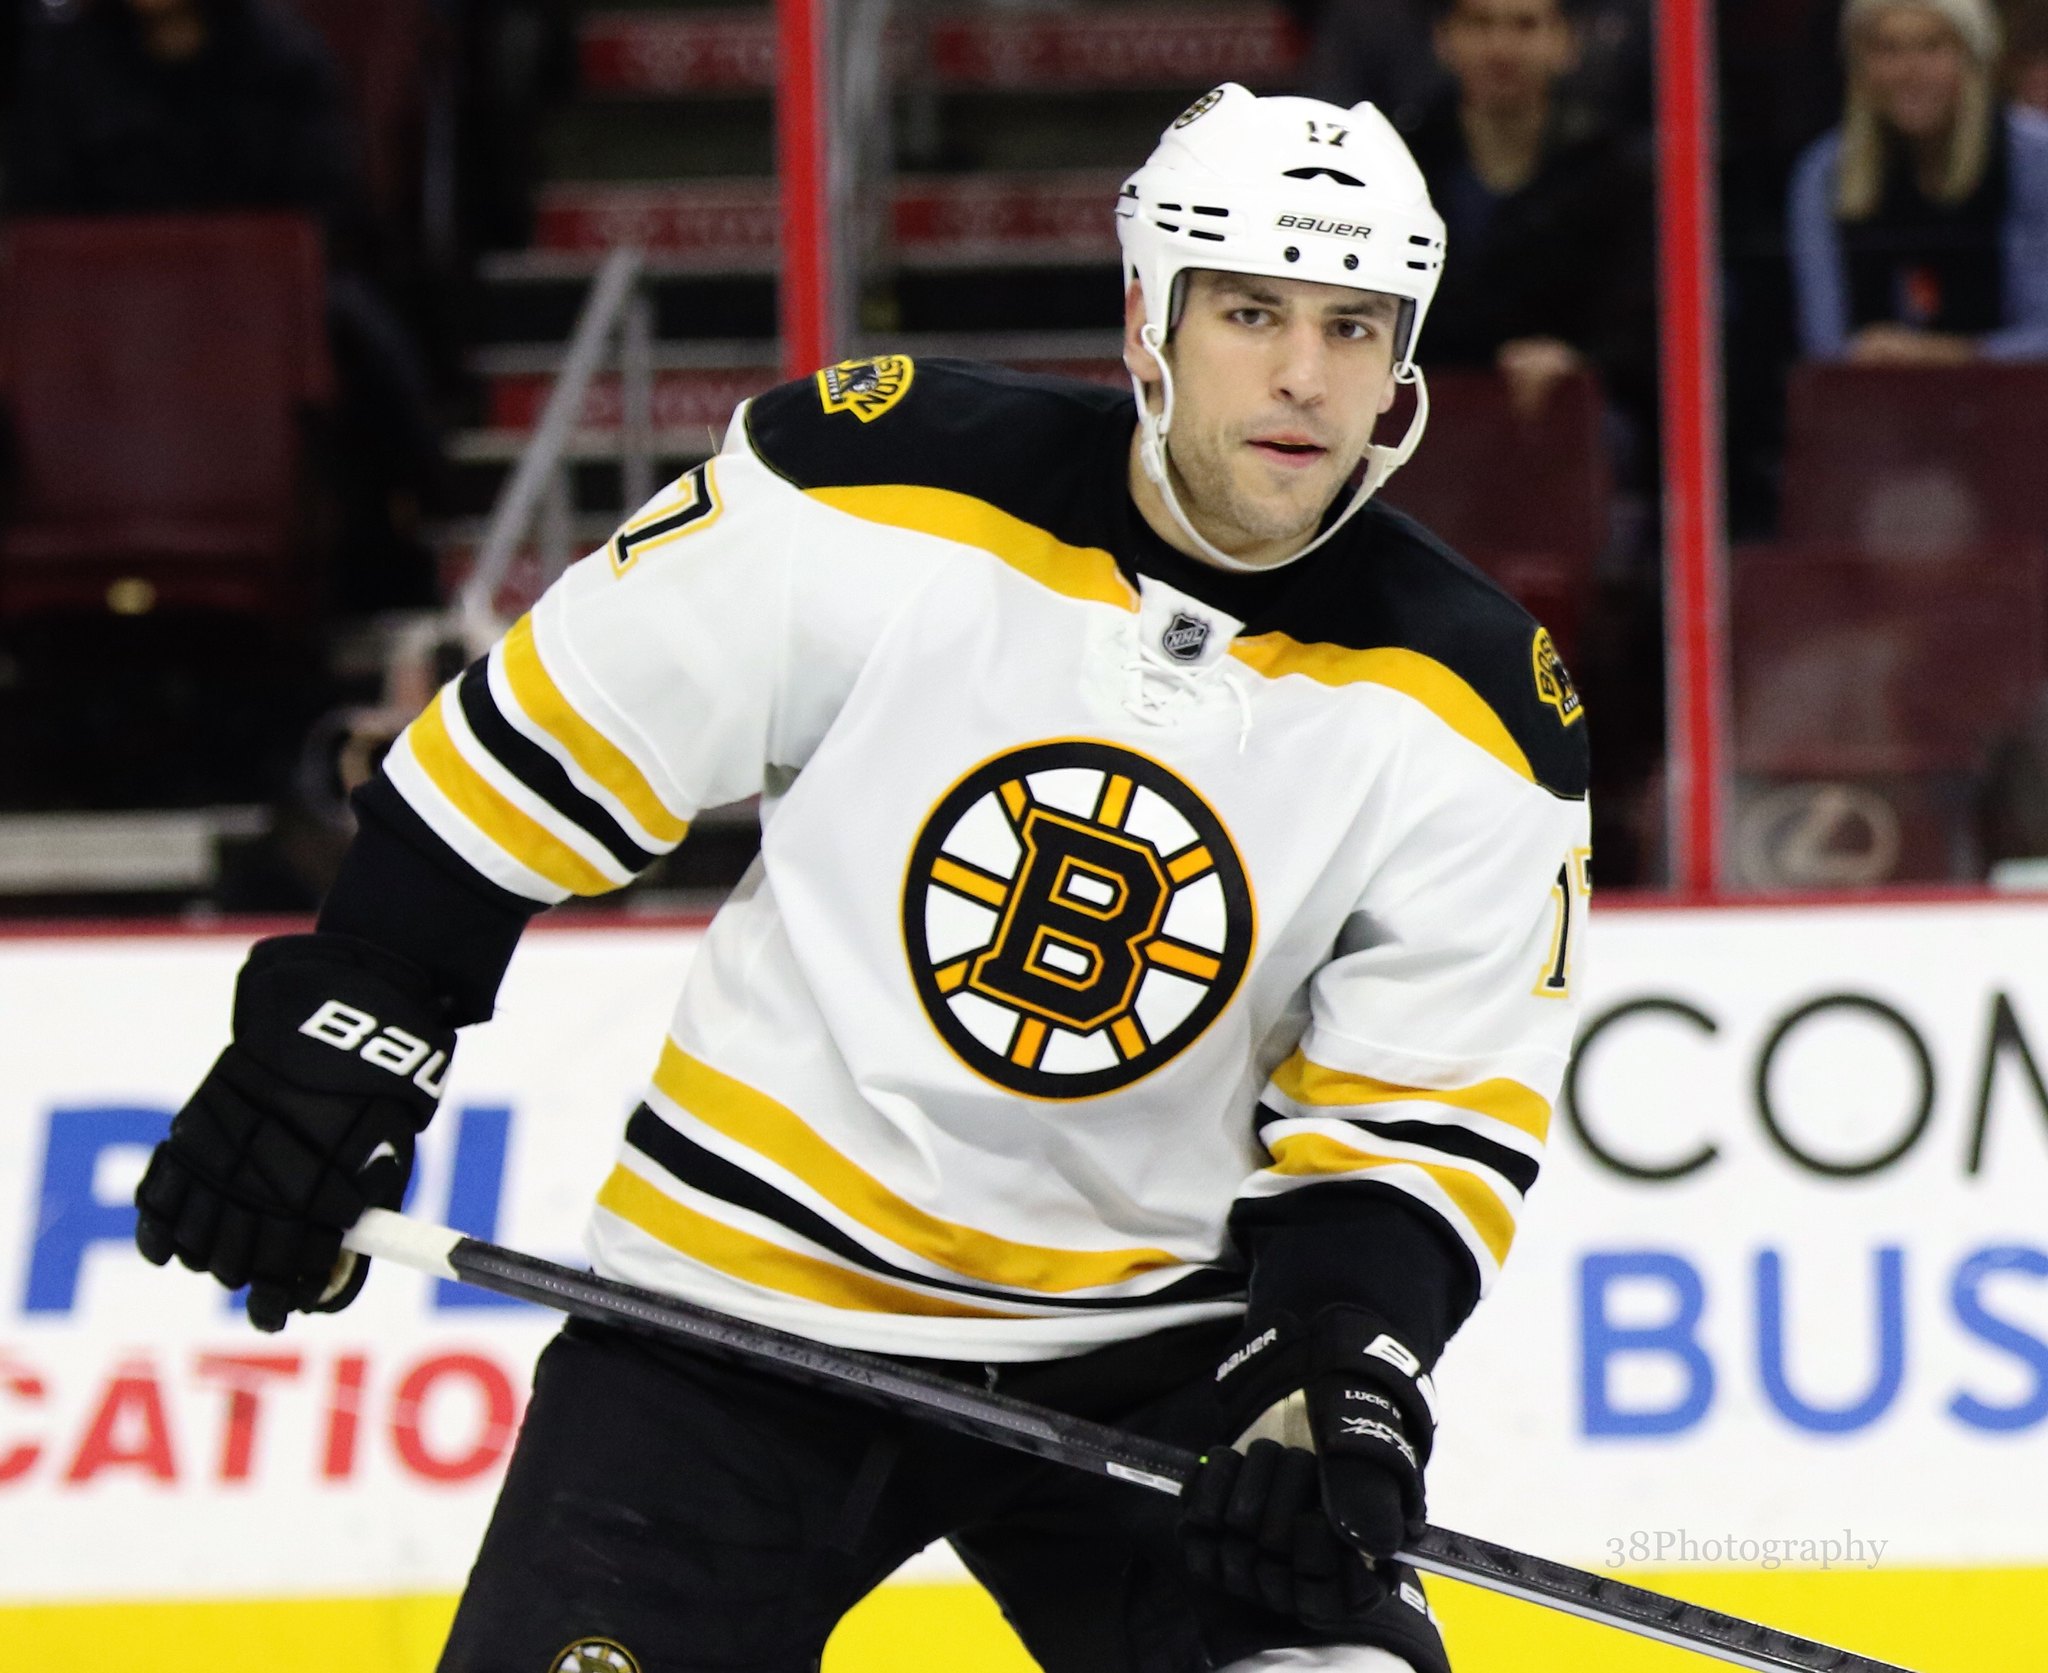 David Krejci thrilled to be back in Black and Gold